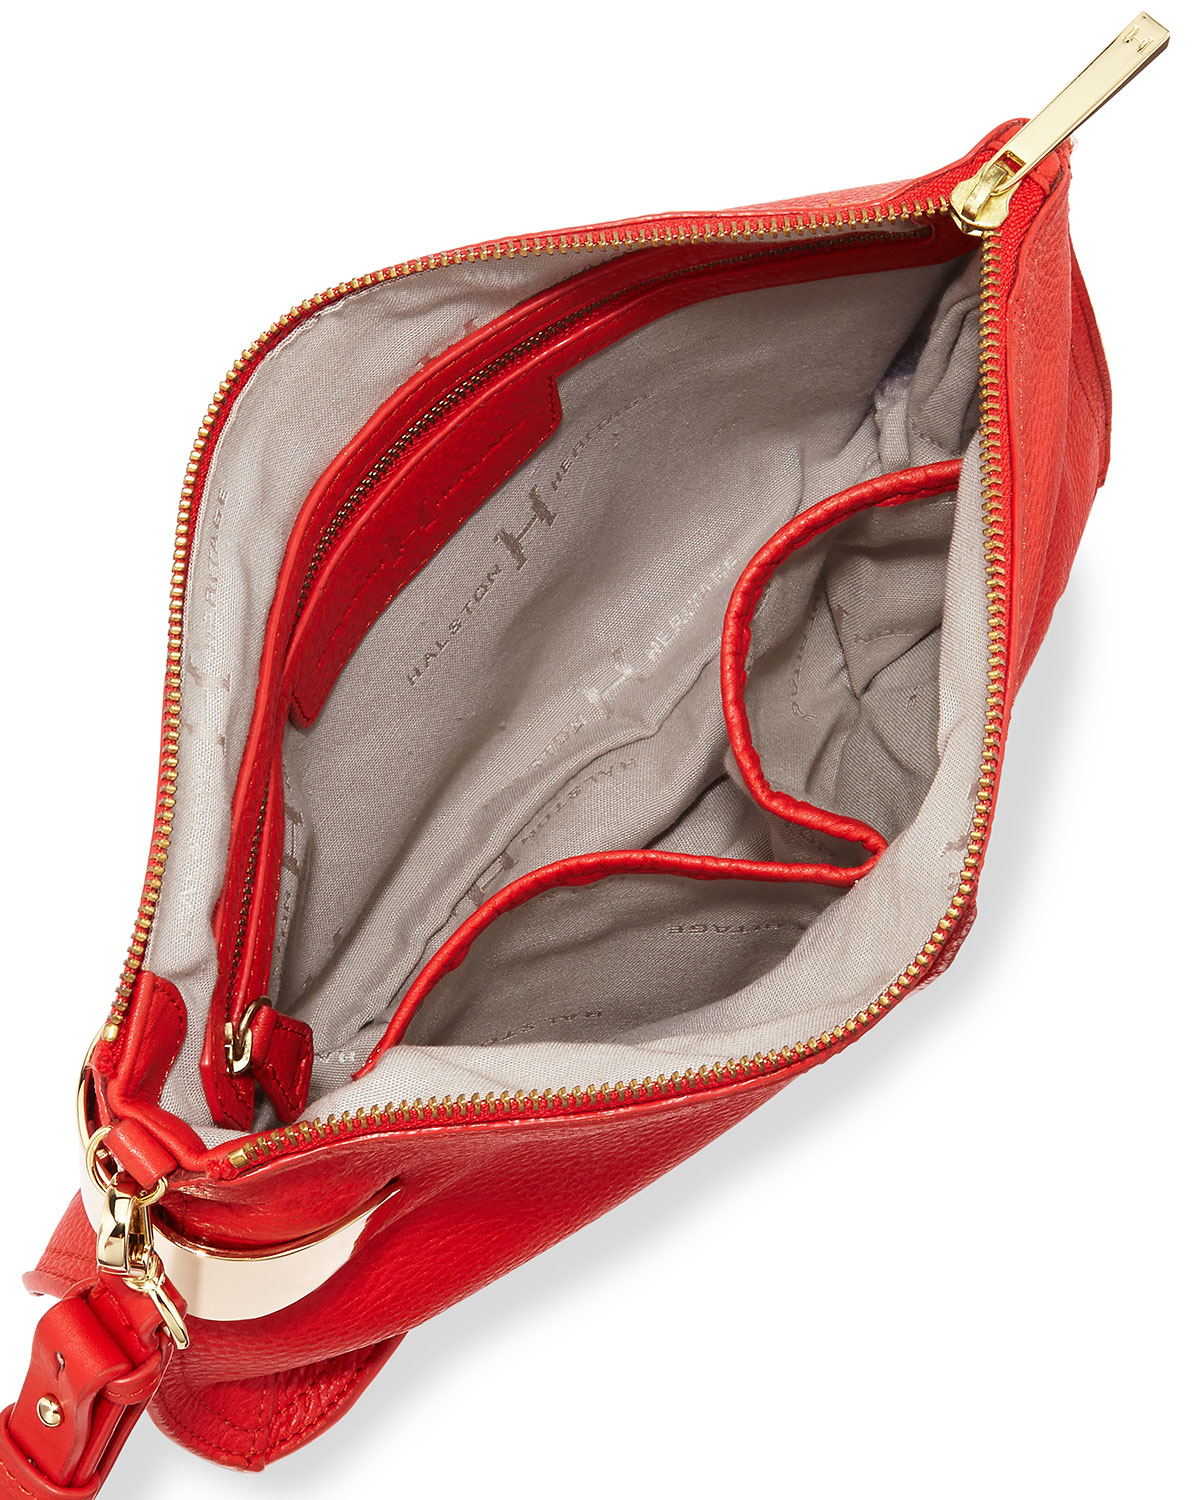 Halston Large Leather Wristlet Clutch Bag in Red | Lyst